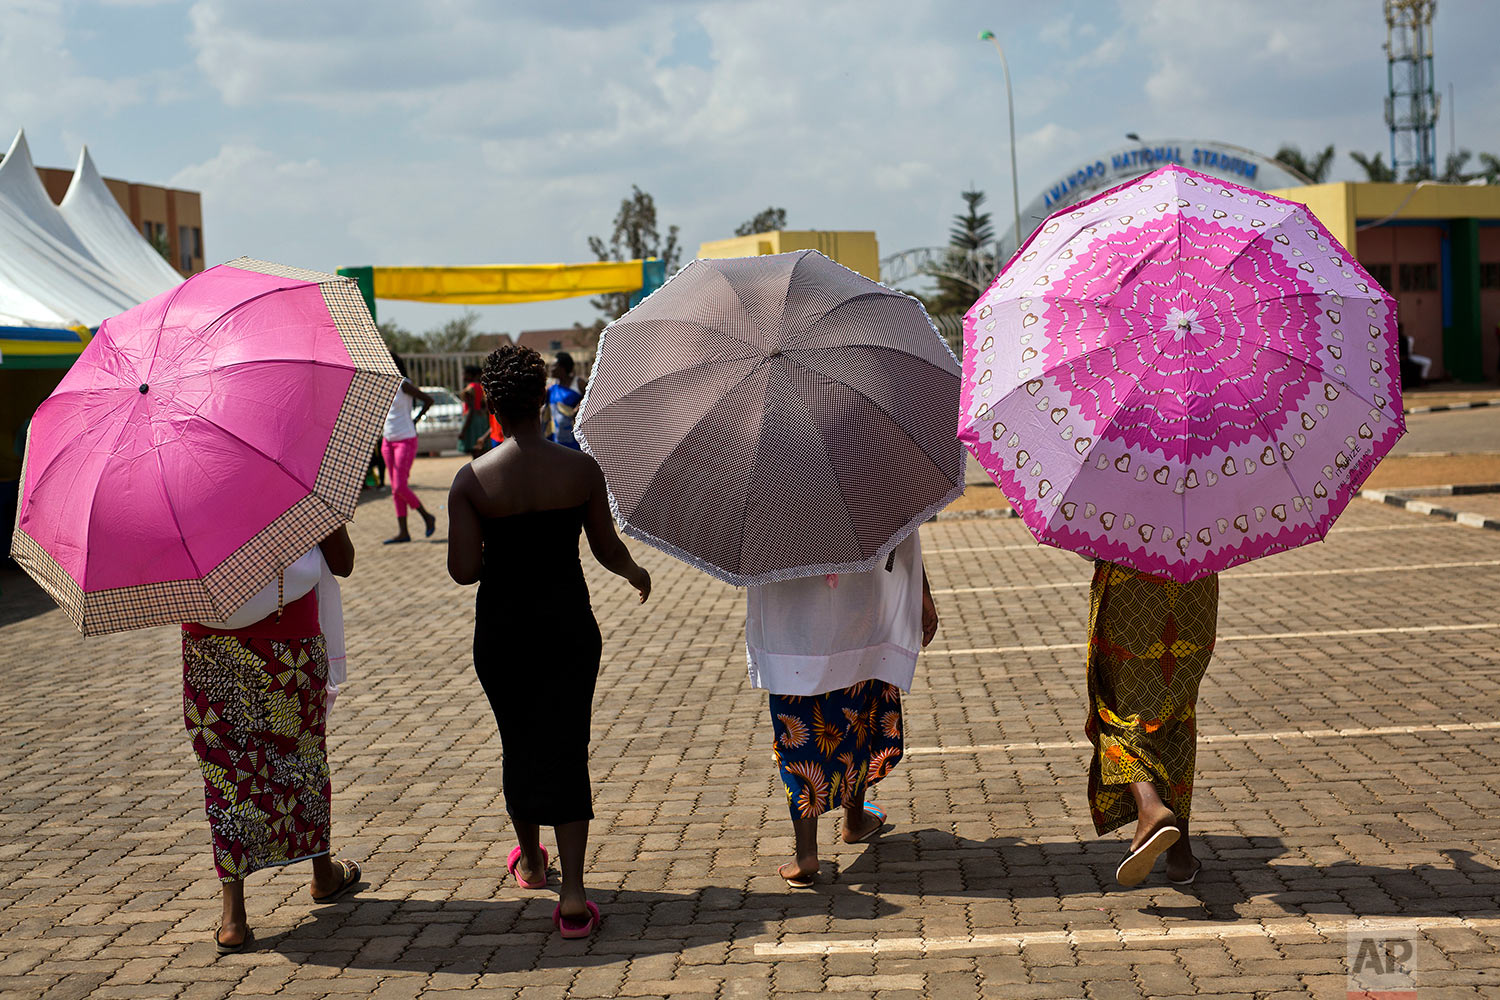  Women leave a polling station in Rwanda's capital Kigali Friday Aug. 4, 2017, after casting their votes in the presidential elections. Rwandans are voting in an election Friday that the country's longtime president is widely expected to win, after t